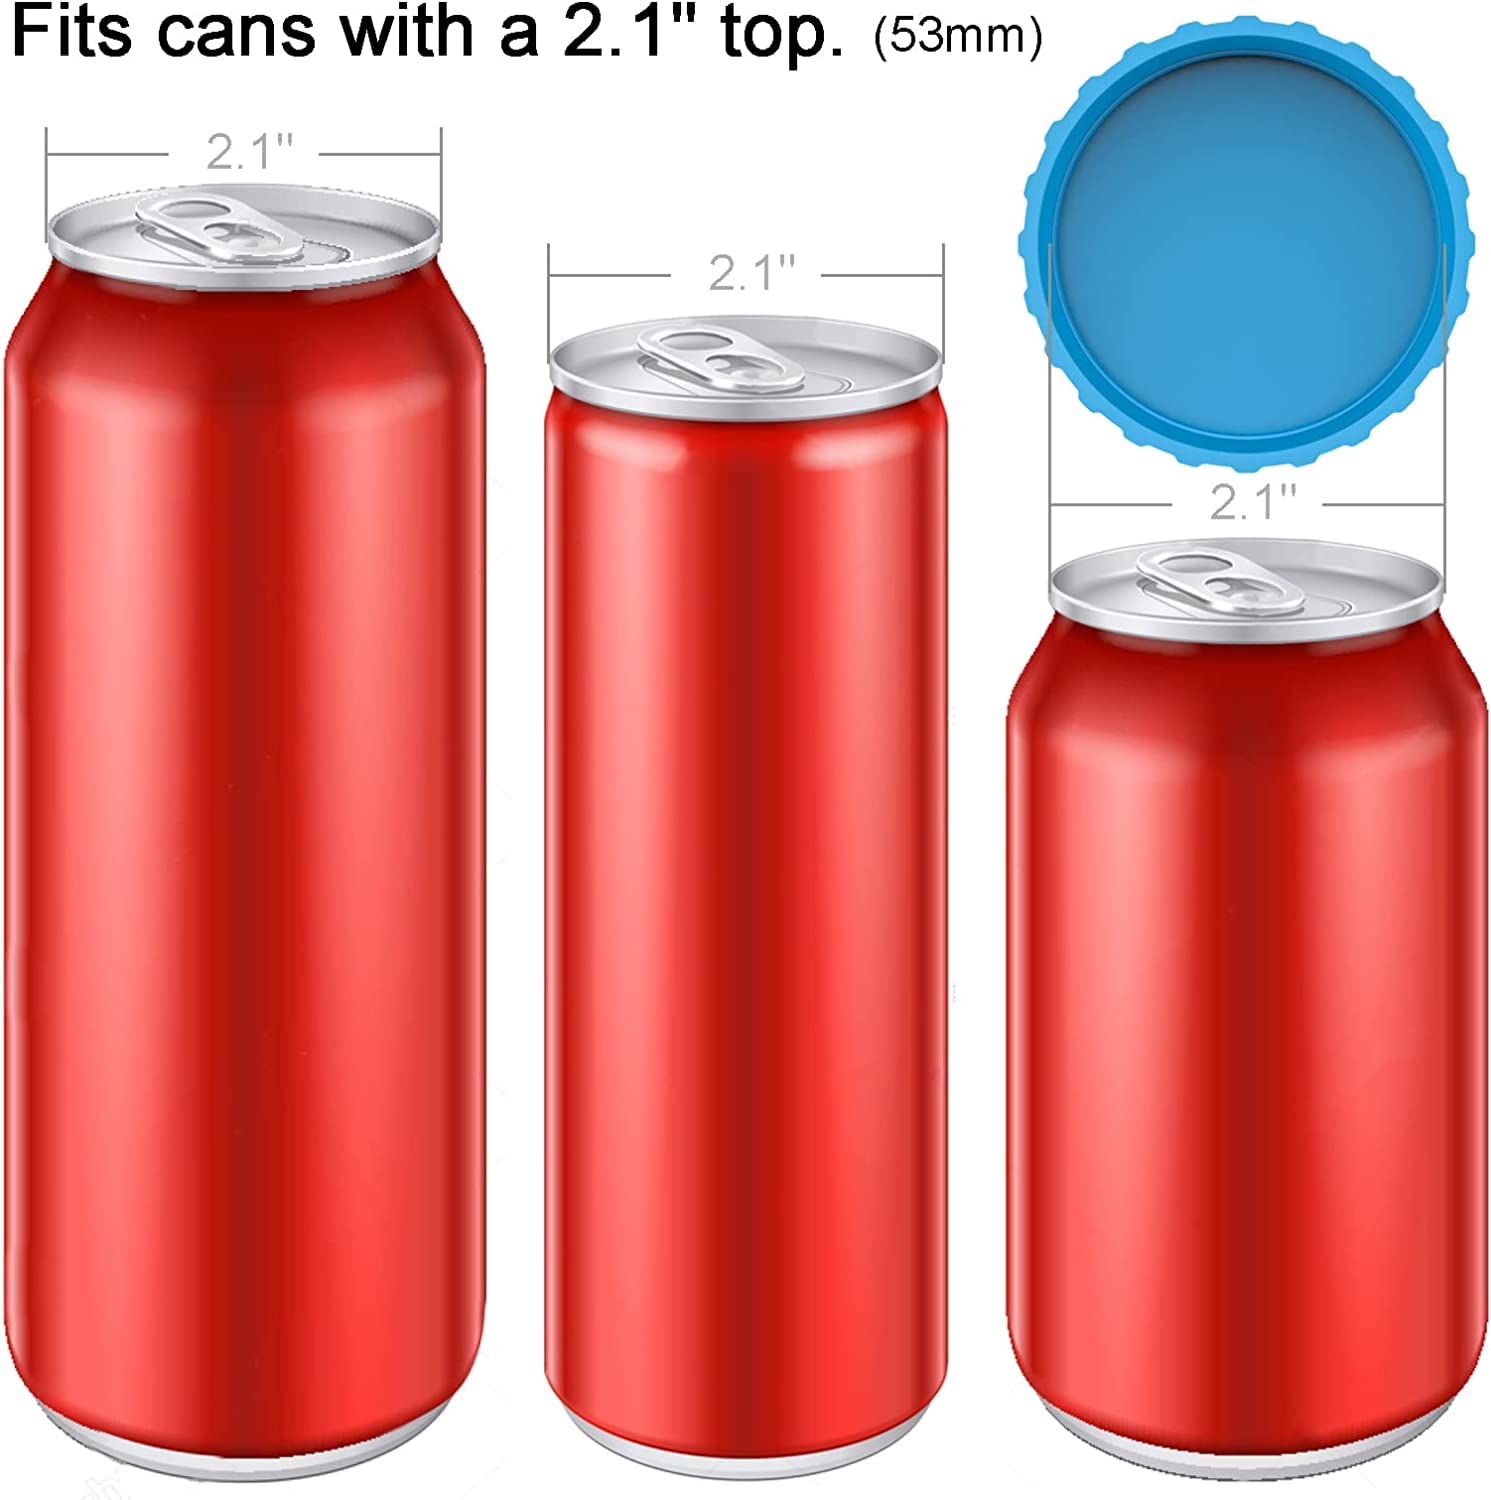 Silicone Soda Can Lids – Can Covers – Can Caps – Can Topper – Can Saver – Can Stopper – Fits standard soda cans (6 Pack, Assorted)